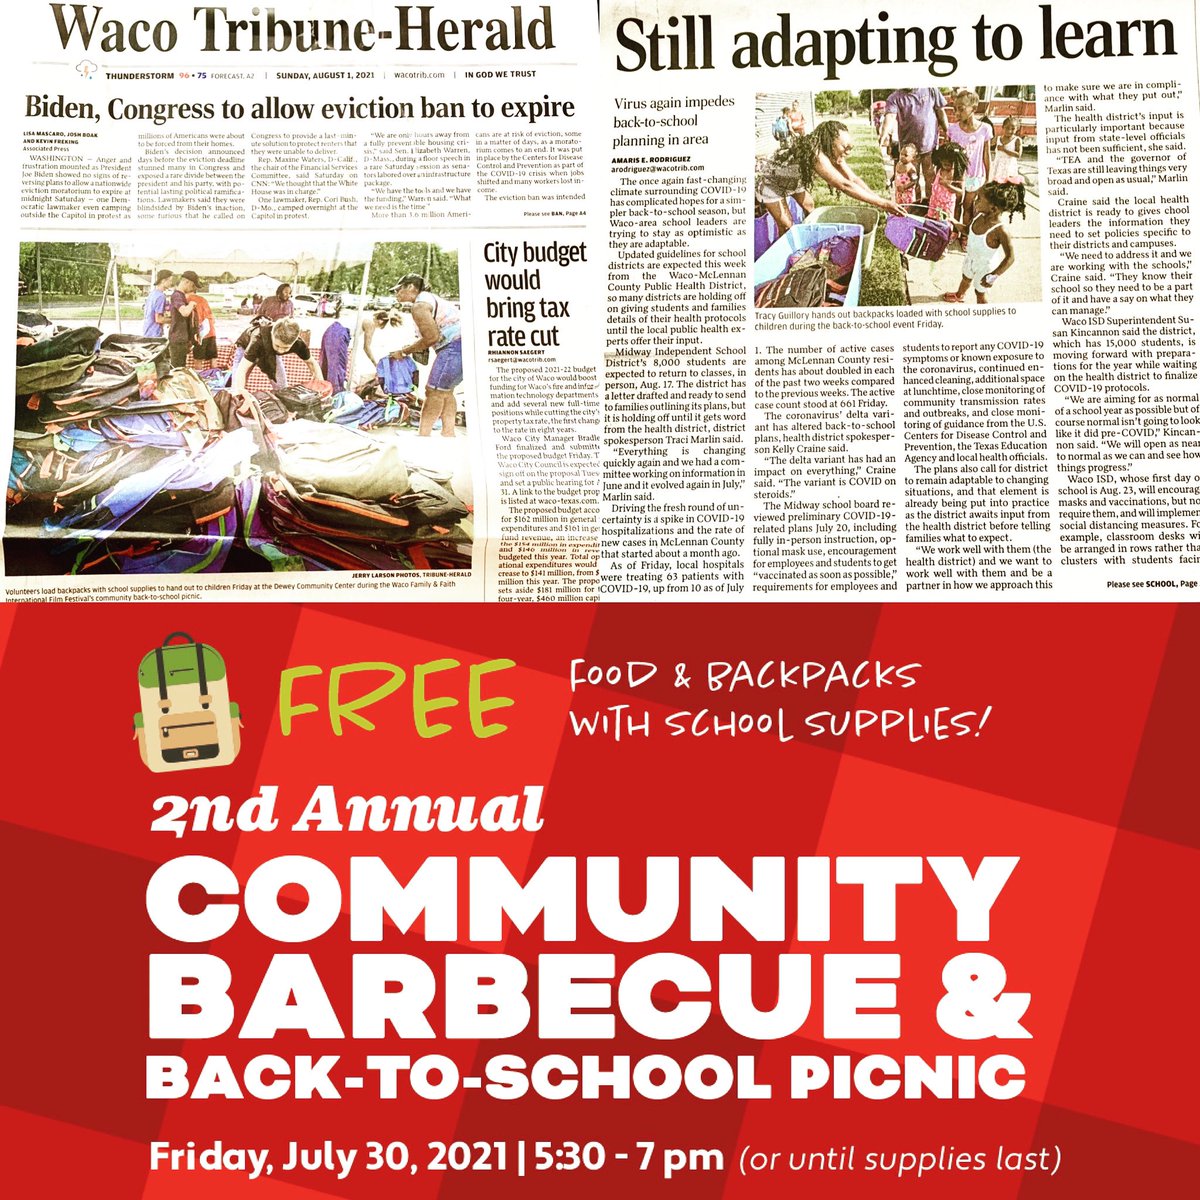 Thanks @wacotrib for the AWESOME front page coverage! #wacofilmfest #servingthecommunitywithheart #hebhelpinghere